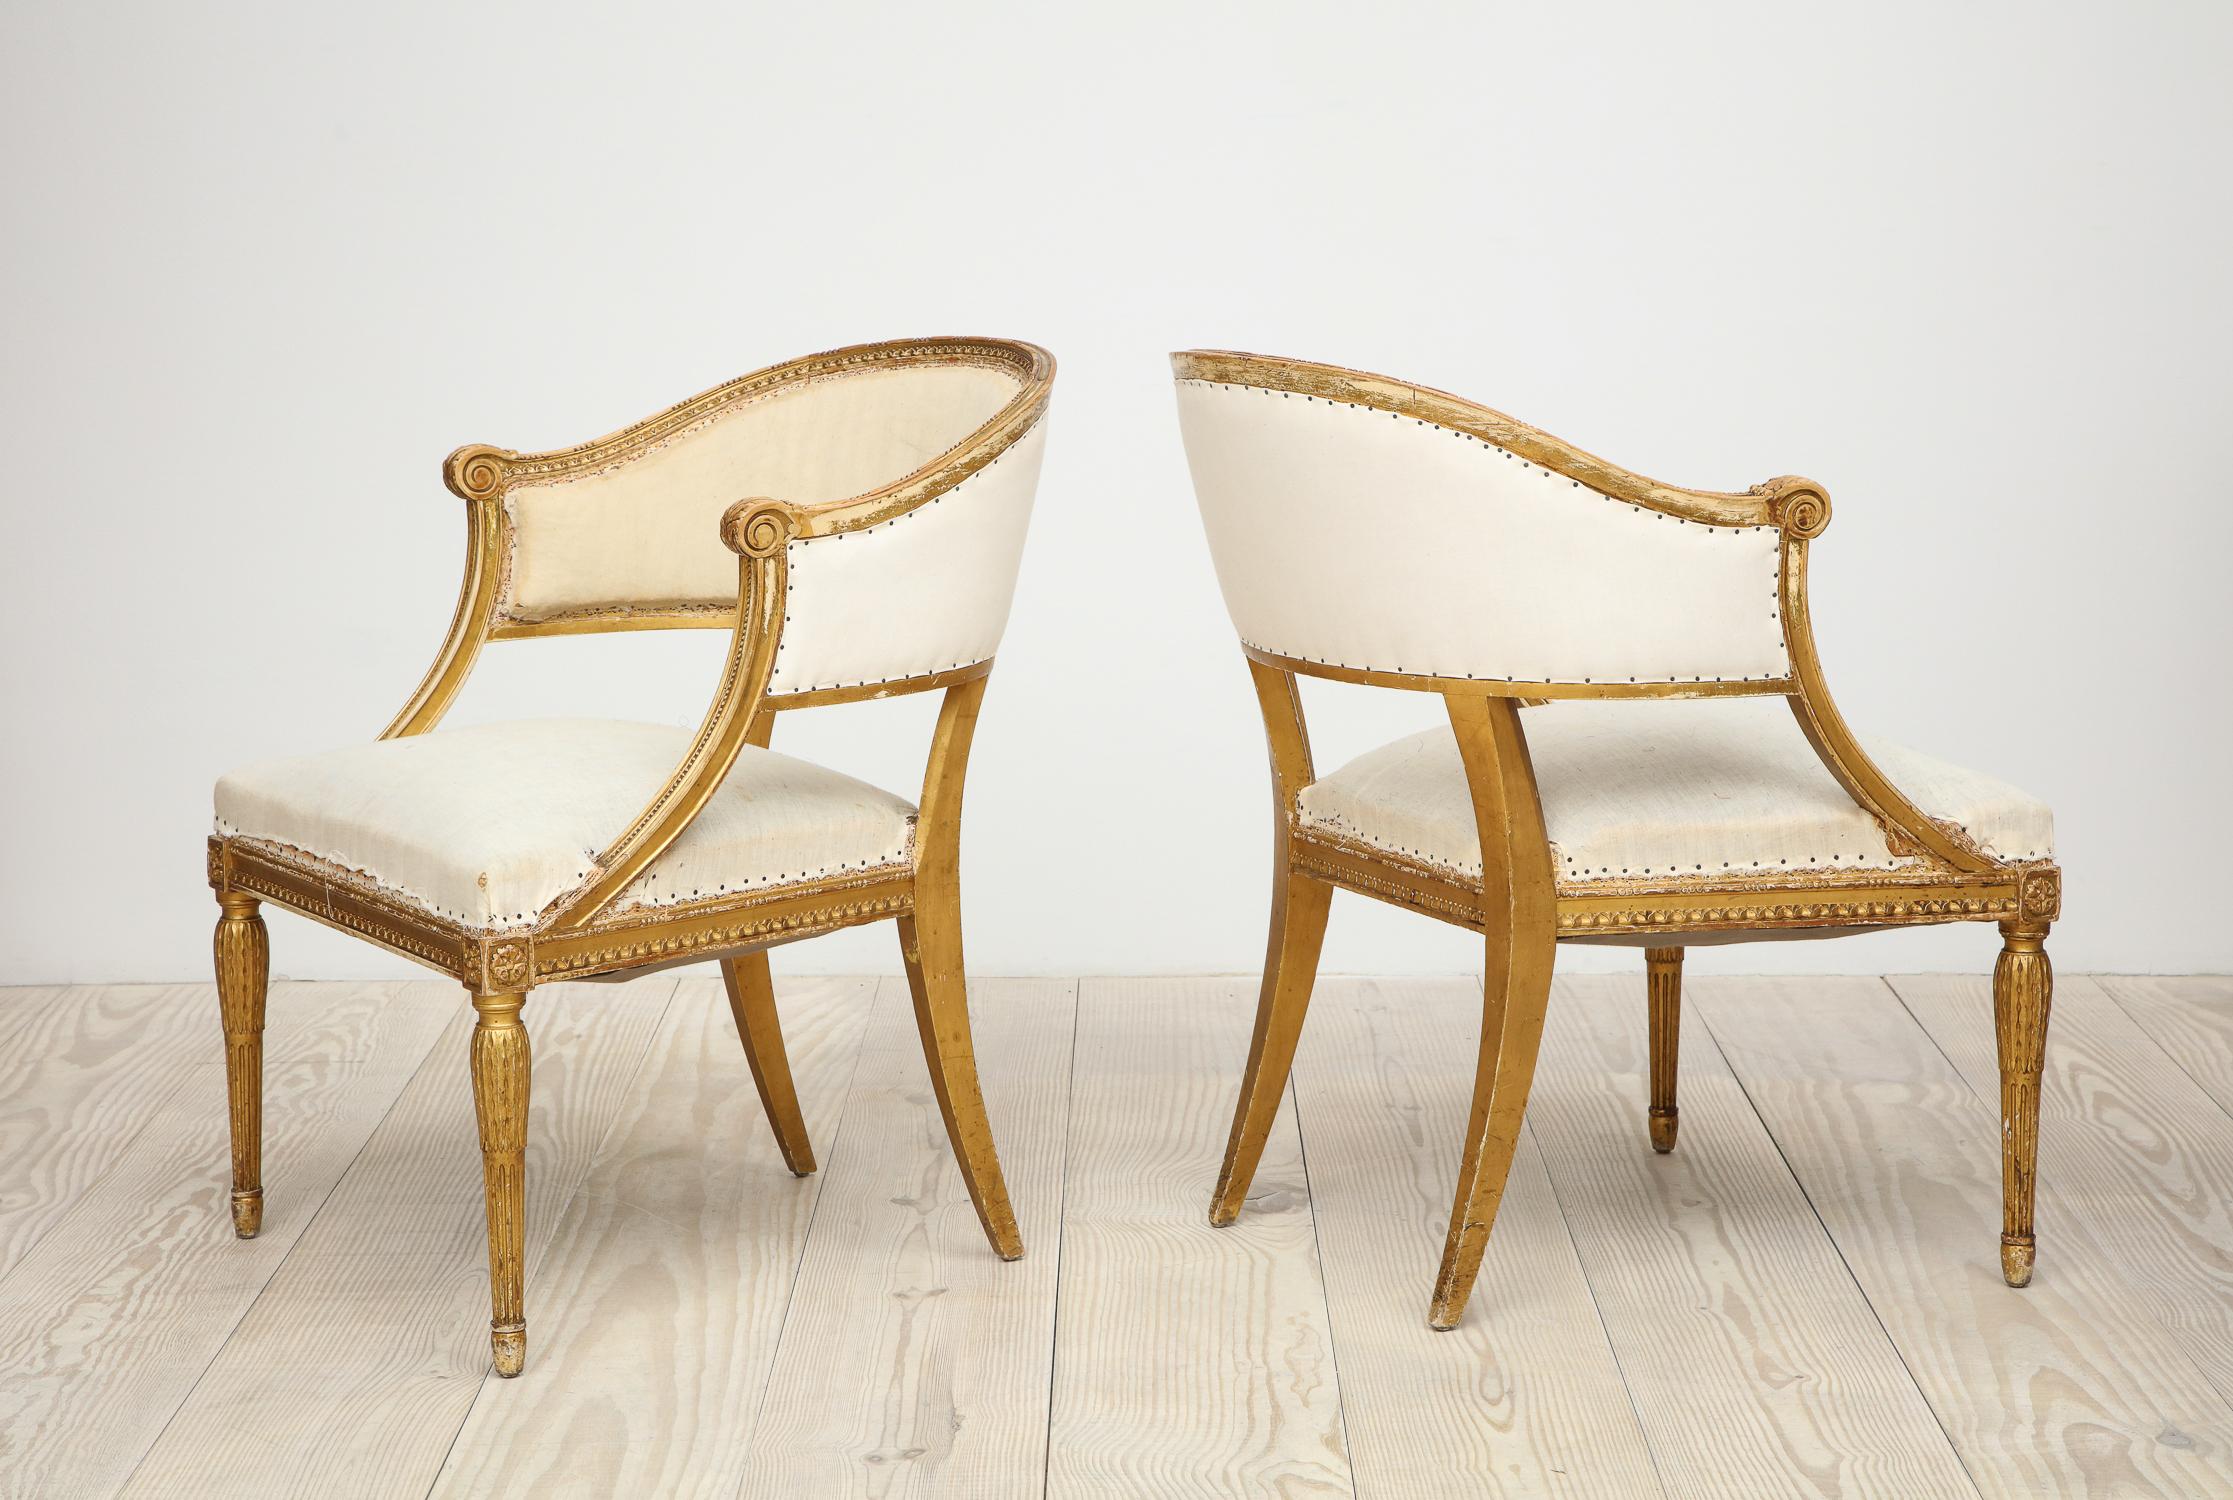 Hand-Carved 18th Century Giltwood Gustavian Bucket Chairs, Set of 4, Sweden, Circa 1790-1800